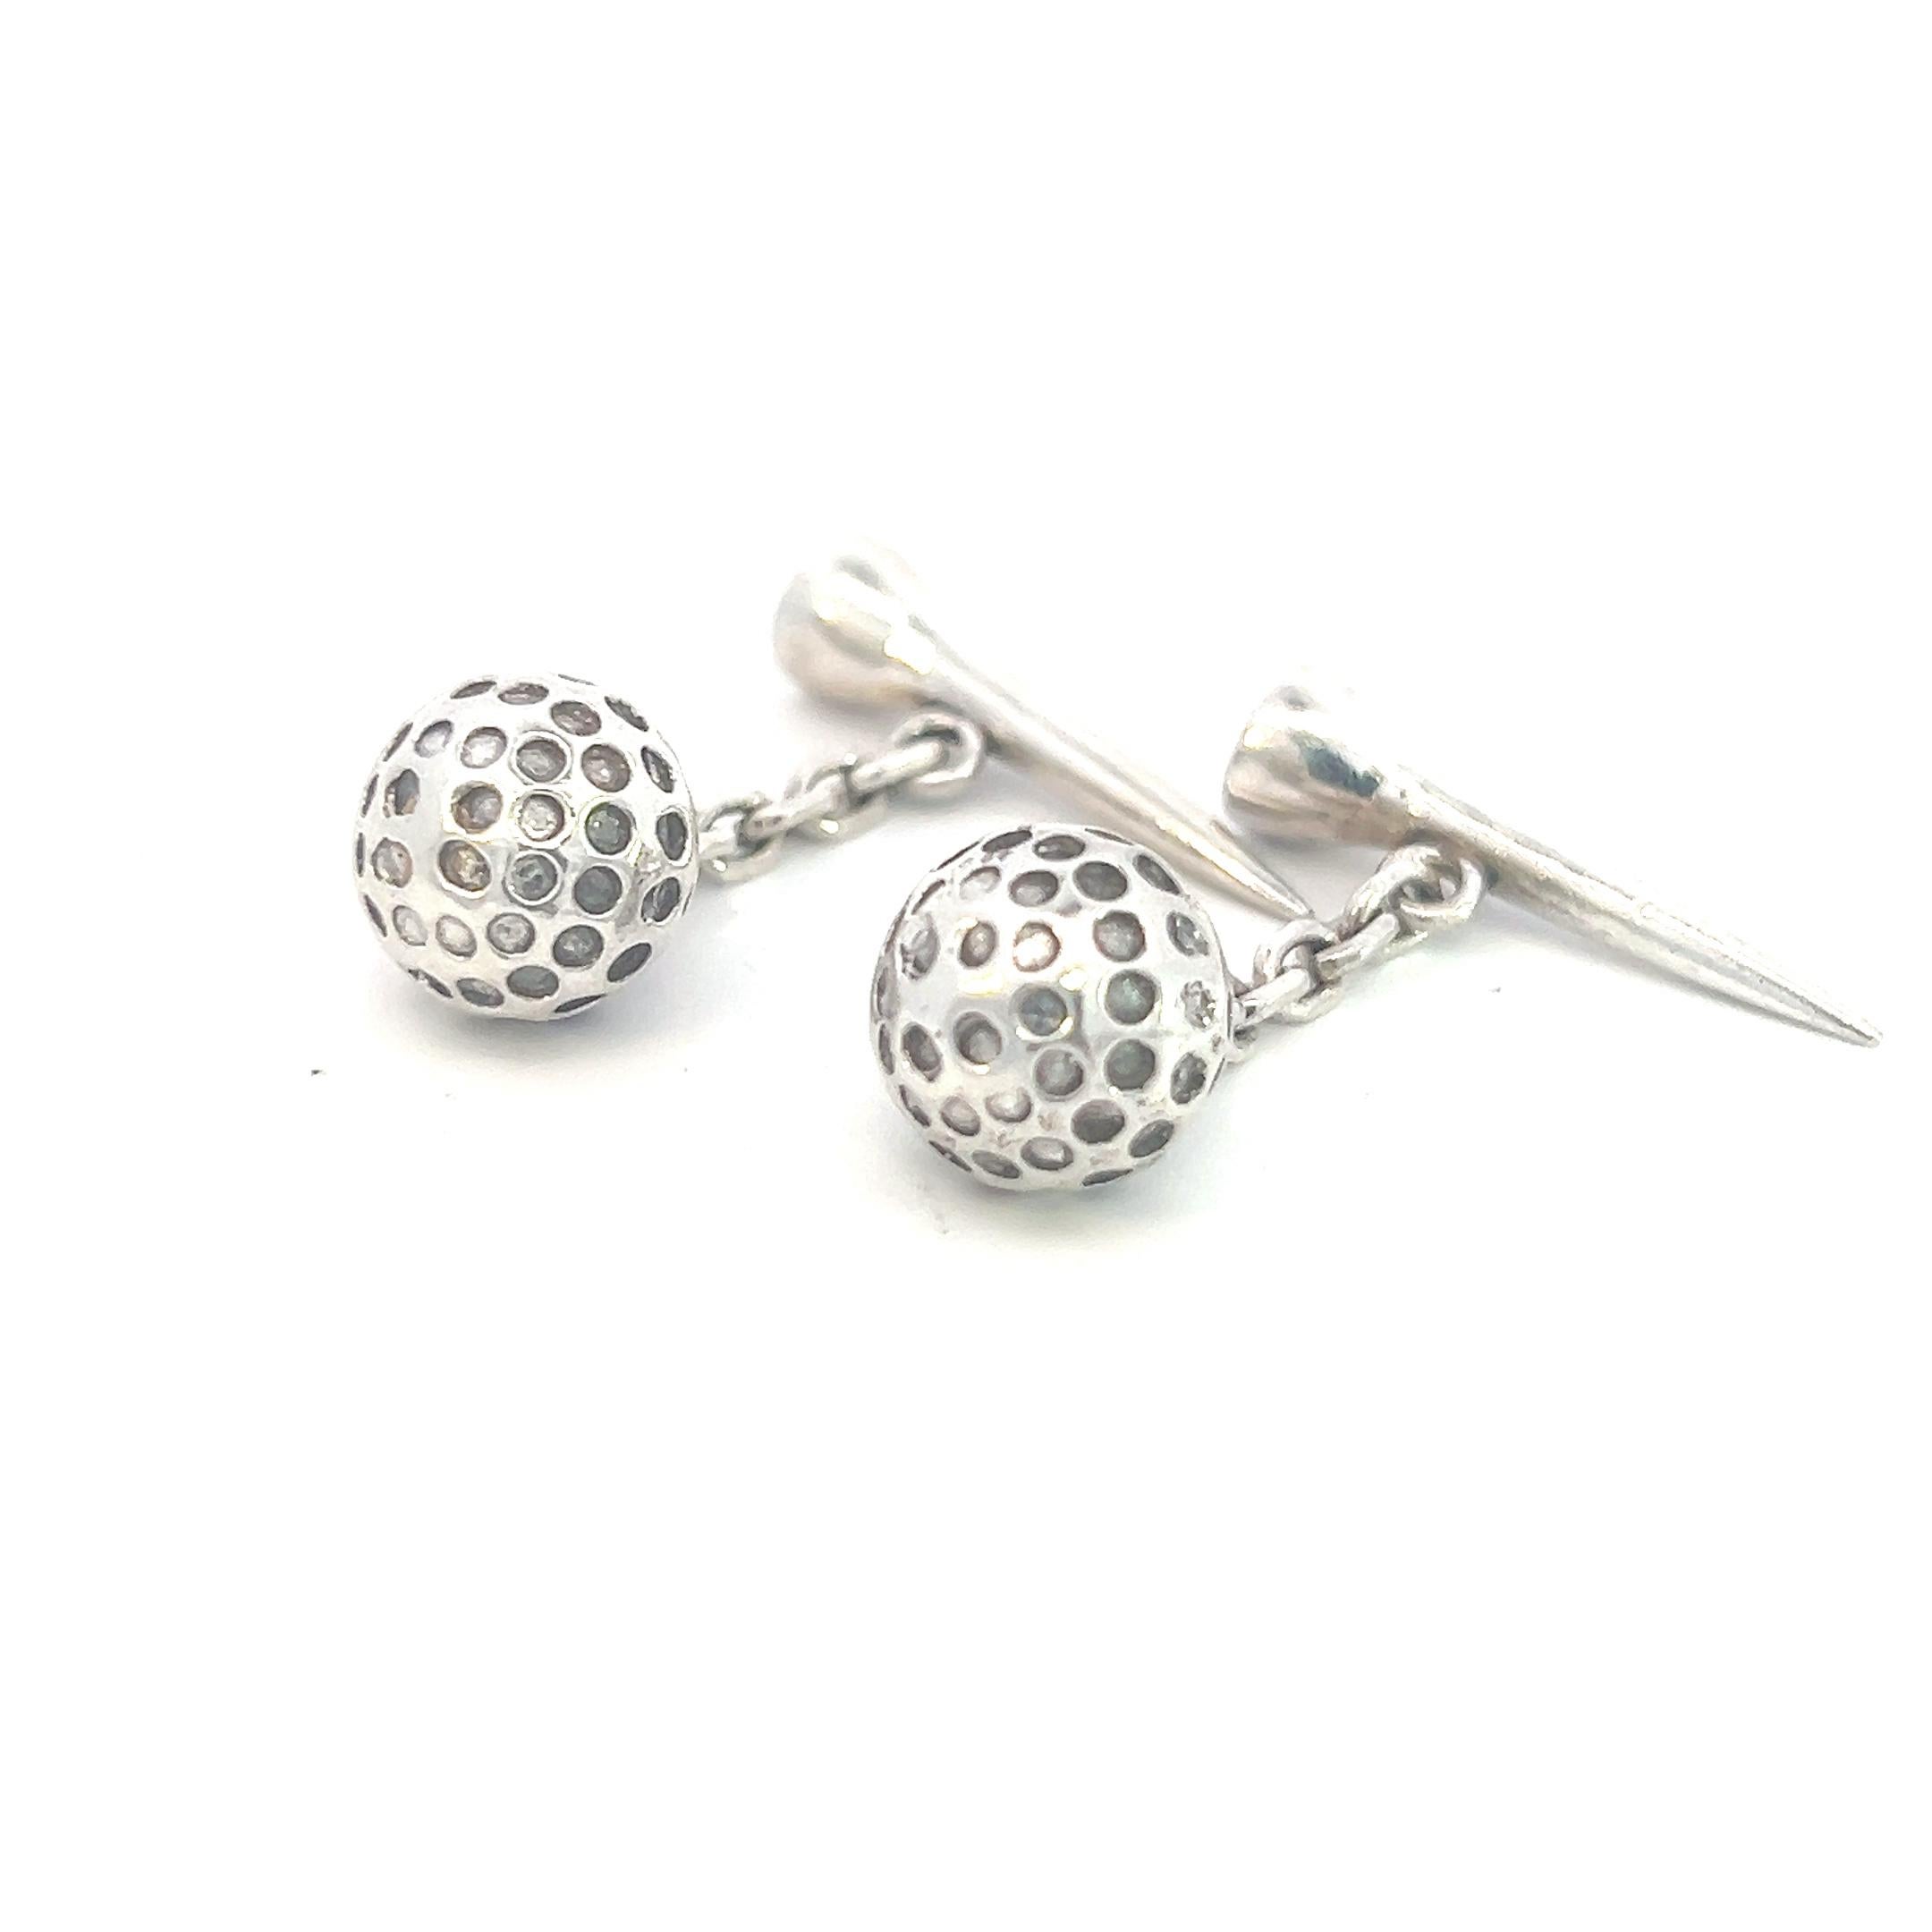 Tiffany & Co Estate Golf Ball Cufflinks Sterling Silver TIF603

TRUSTED SELLER SINCE 2002

PLEASE SEE OUR HUNDREDS OF POSITIVE FEEDBACKS FROM OUR CLIENTS!!

FREE SHIPPING

DETAILS
Metal: Sterling Silver
Weight: 12.60 Grams

These Authentic Tiffany &